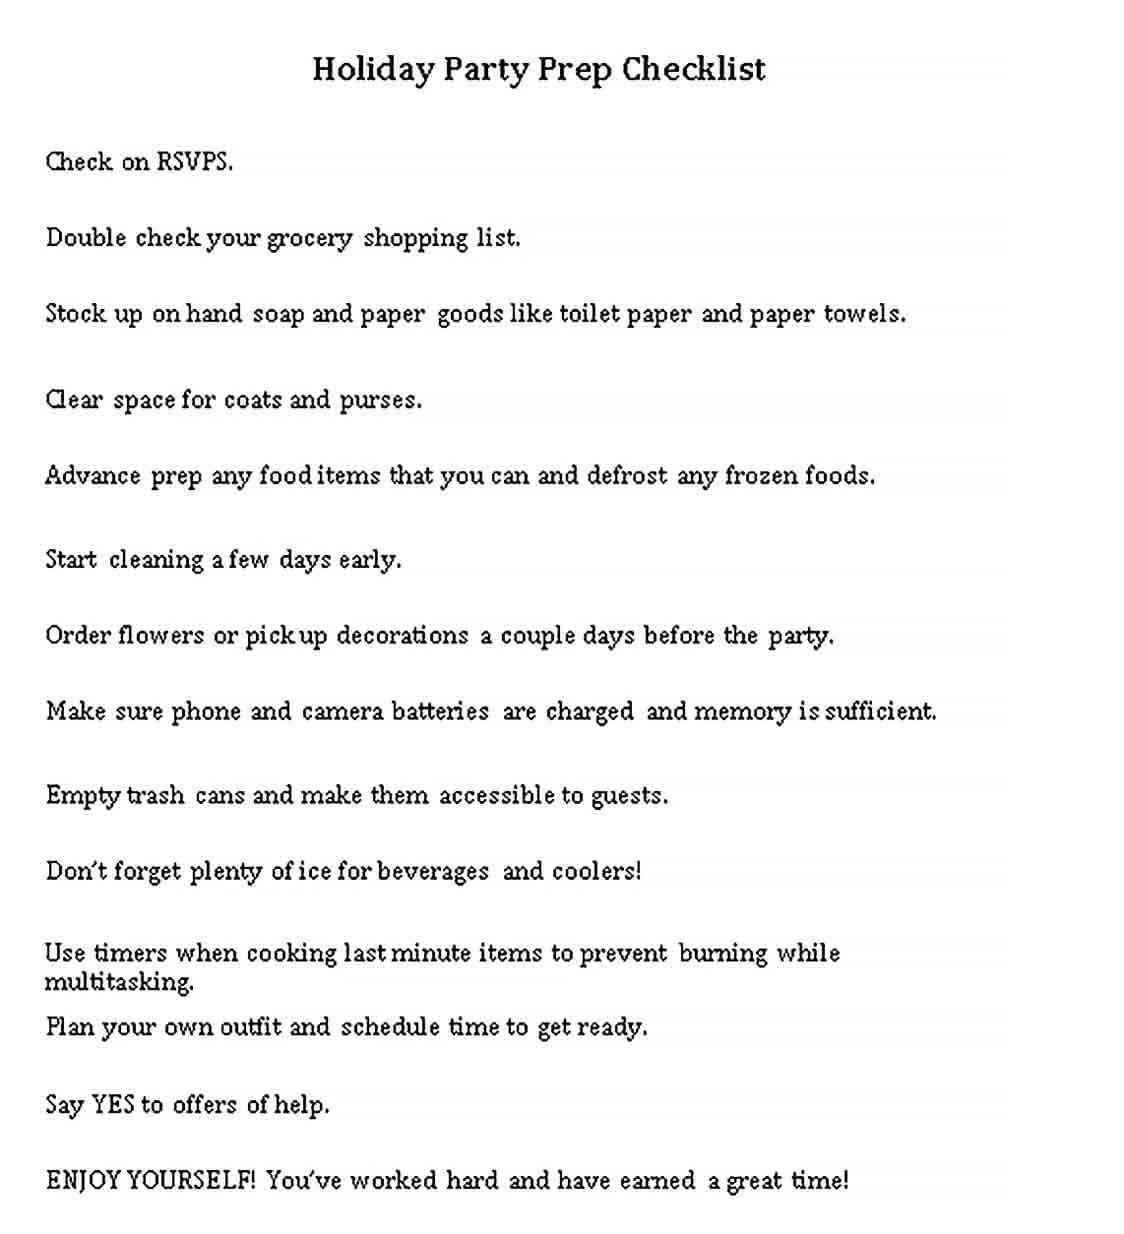 Sample Checklist of Holiday Party